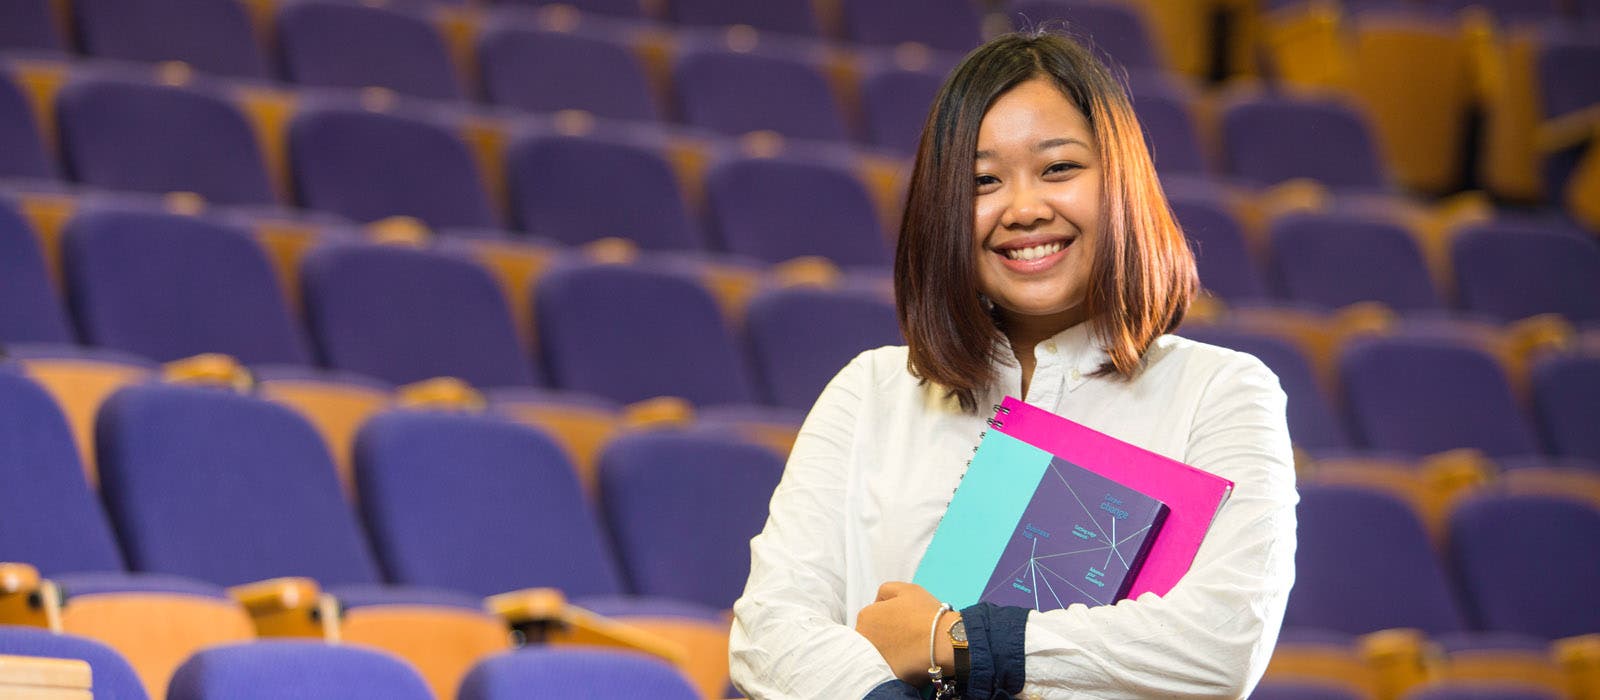 Student smiling in lecture hall and holding textbooks